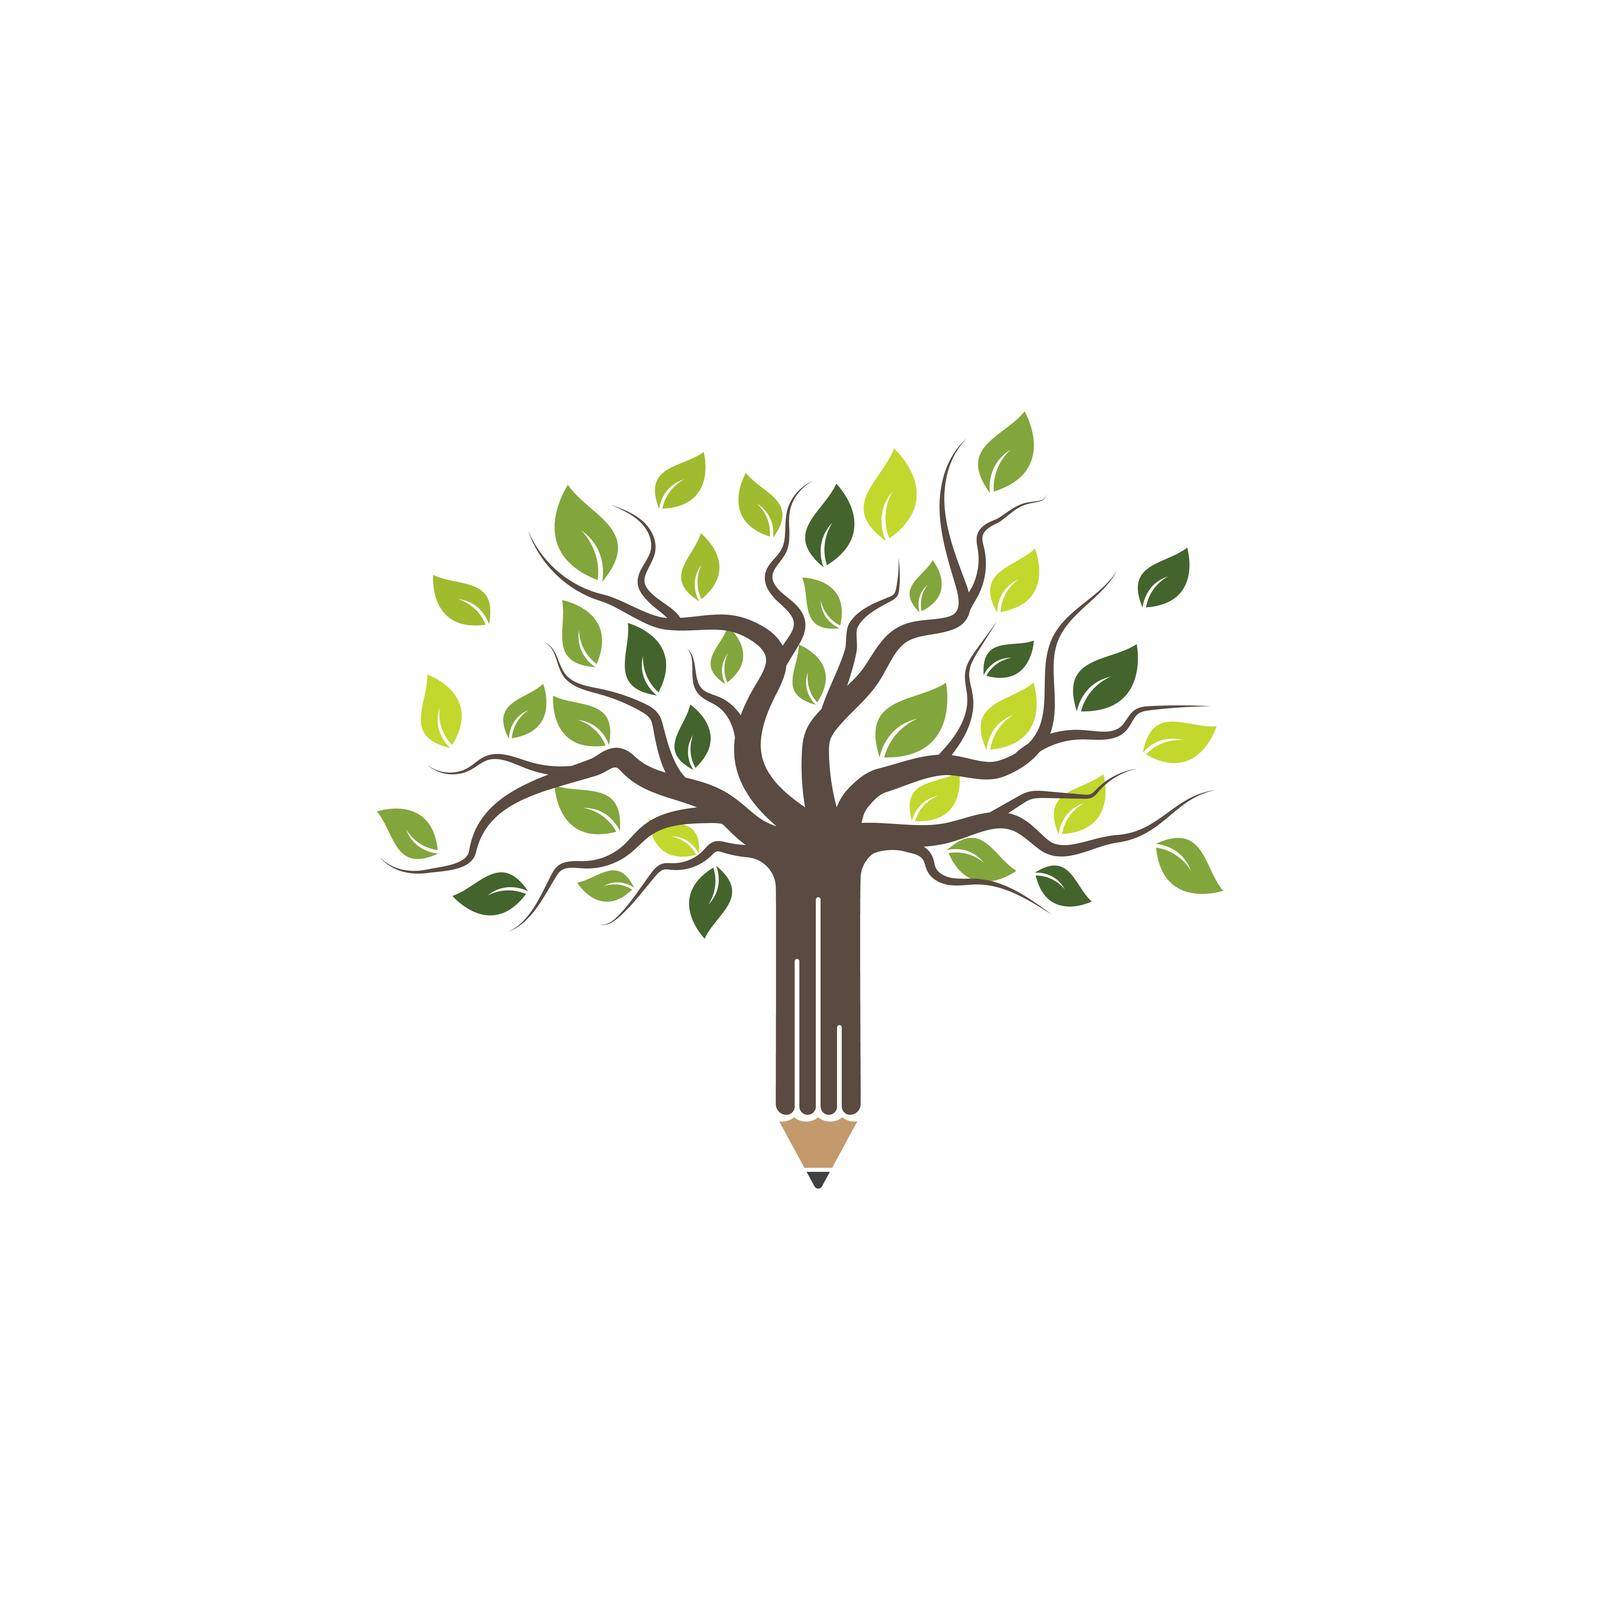 Tree with pencil writer illustration vector design